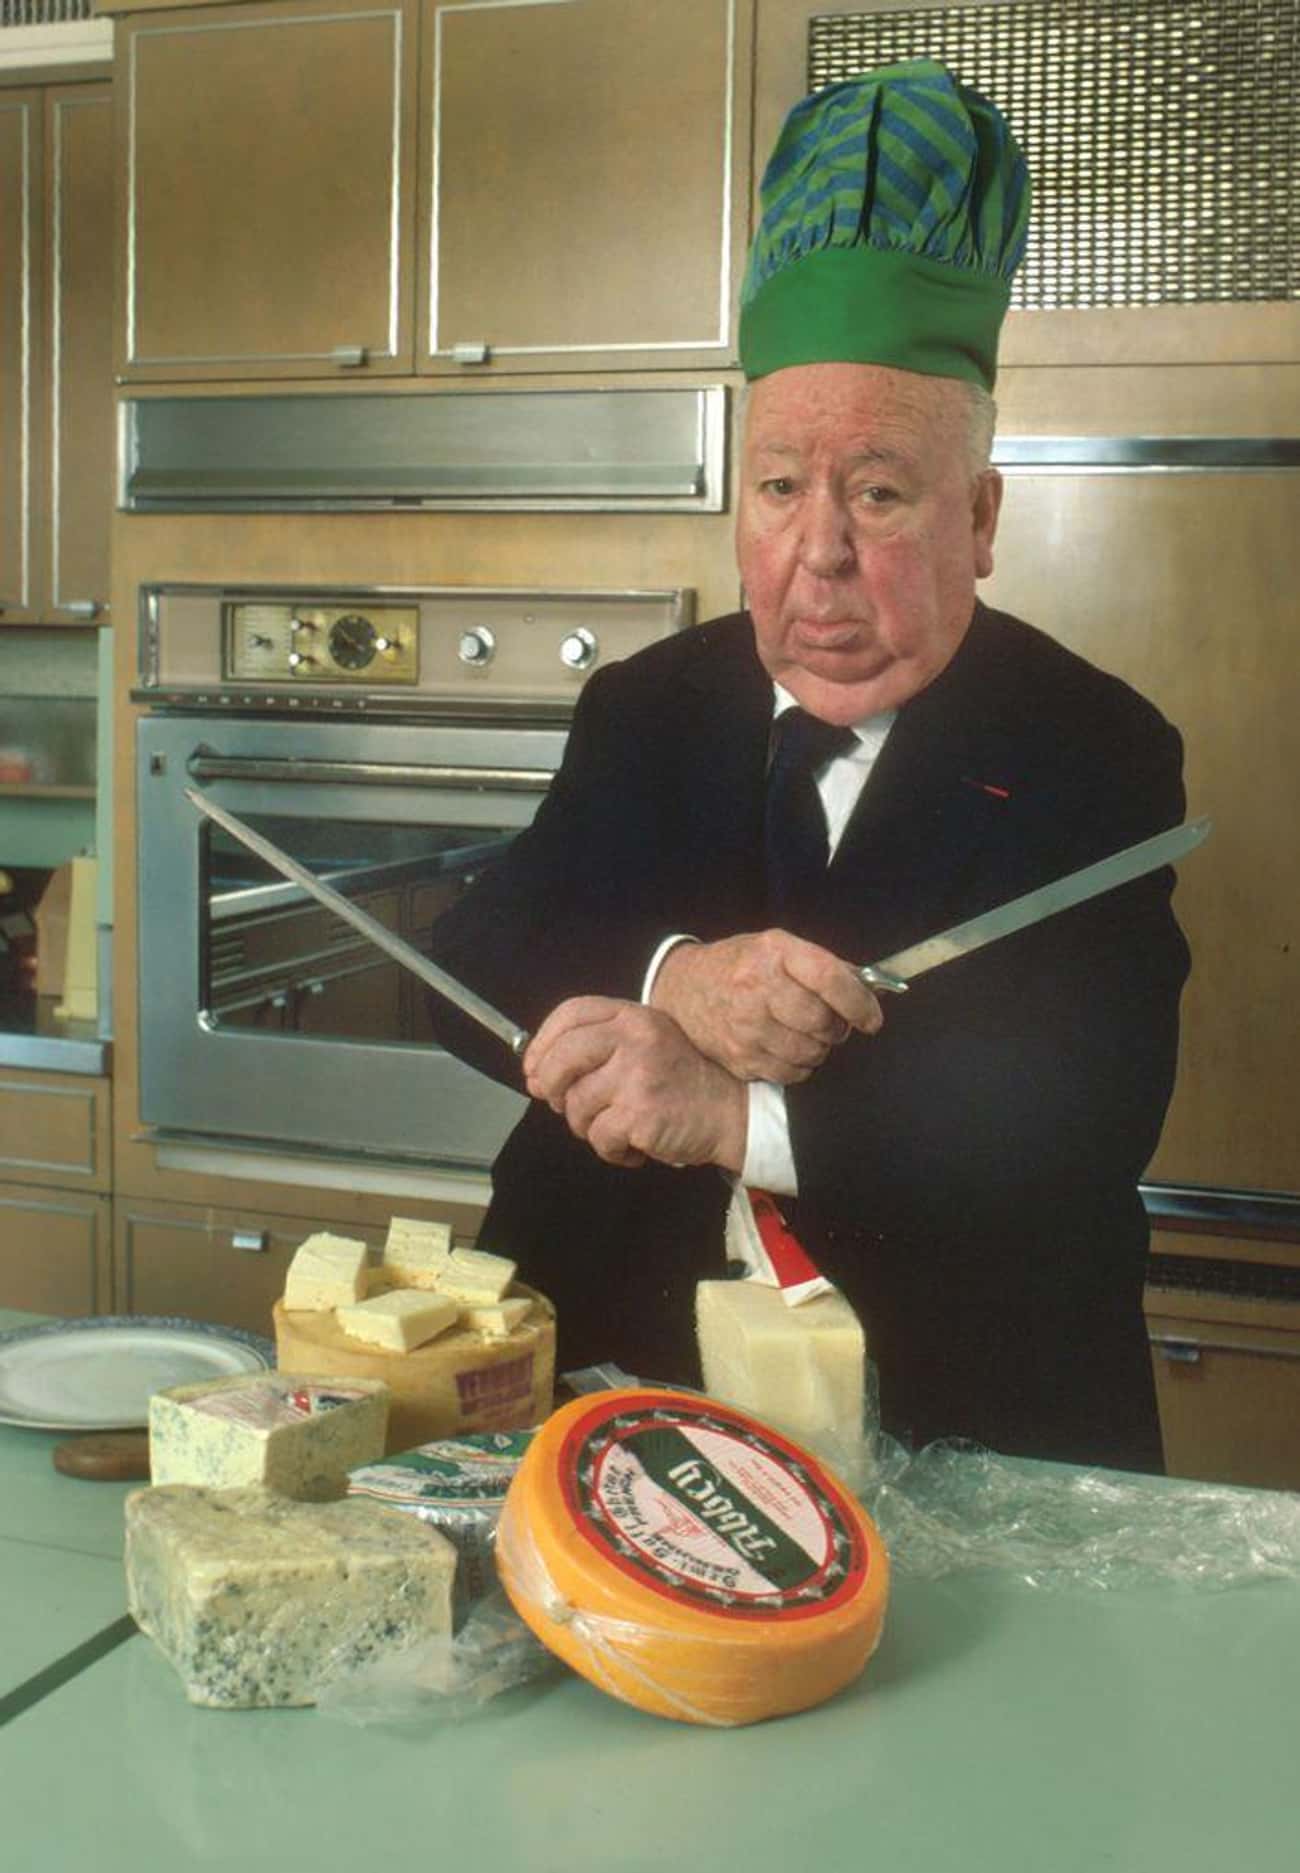 Getting Ready To Slice Some Cheese, 1978